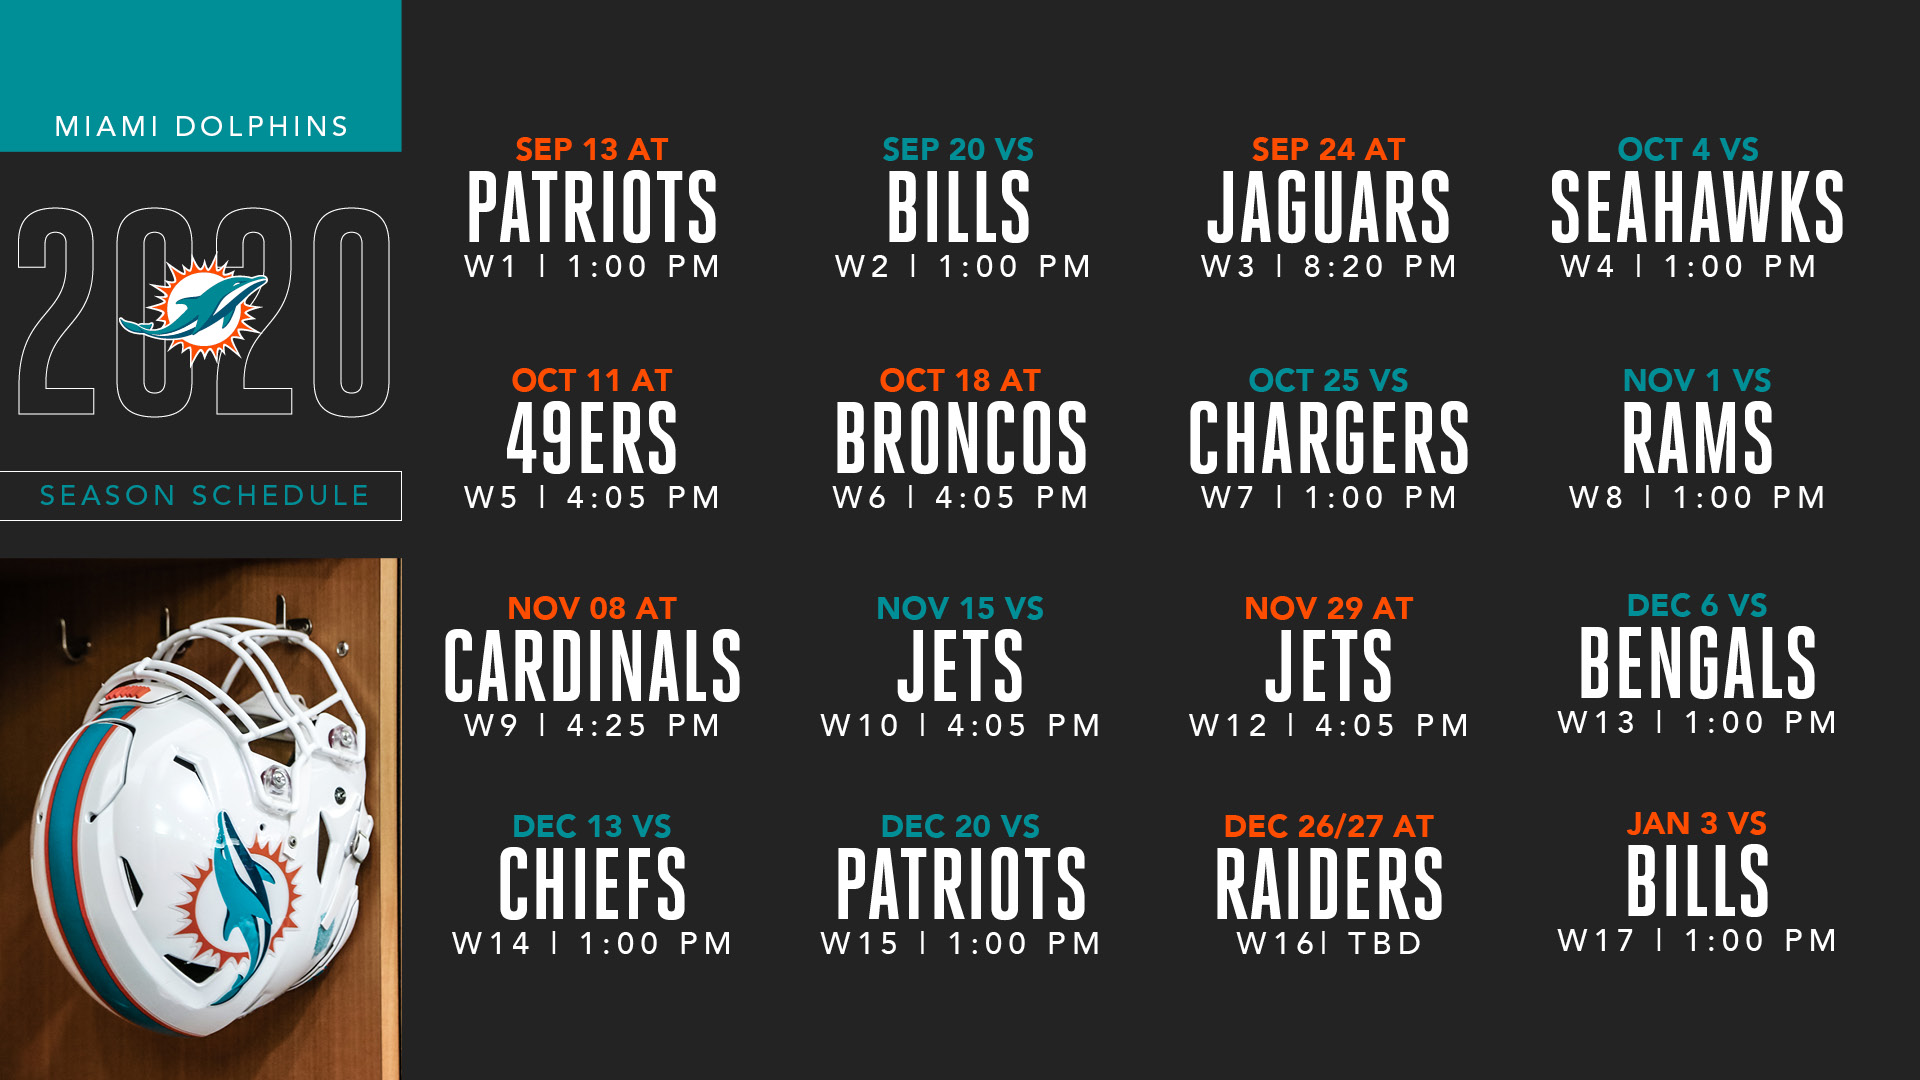 Miami Dolphins 2020 Schedule Wallpaper / NFL Jersey Wallpapers in 2020 | Nfl football wallpaper